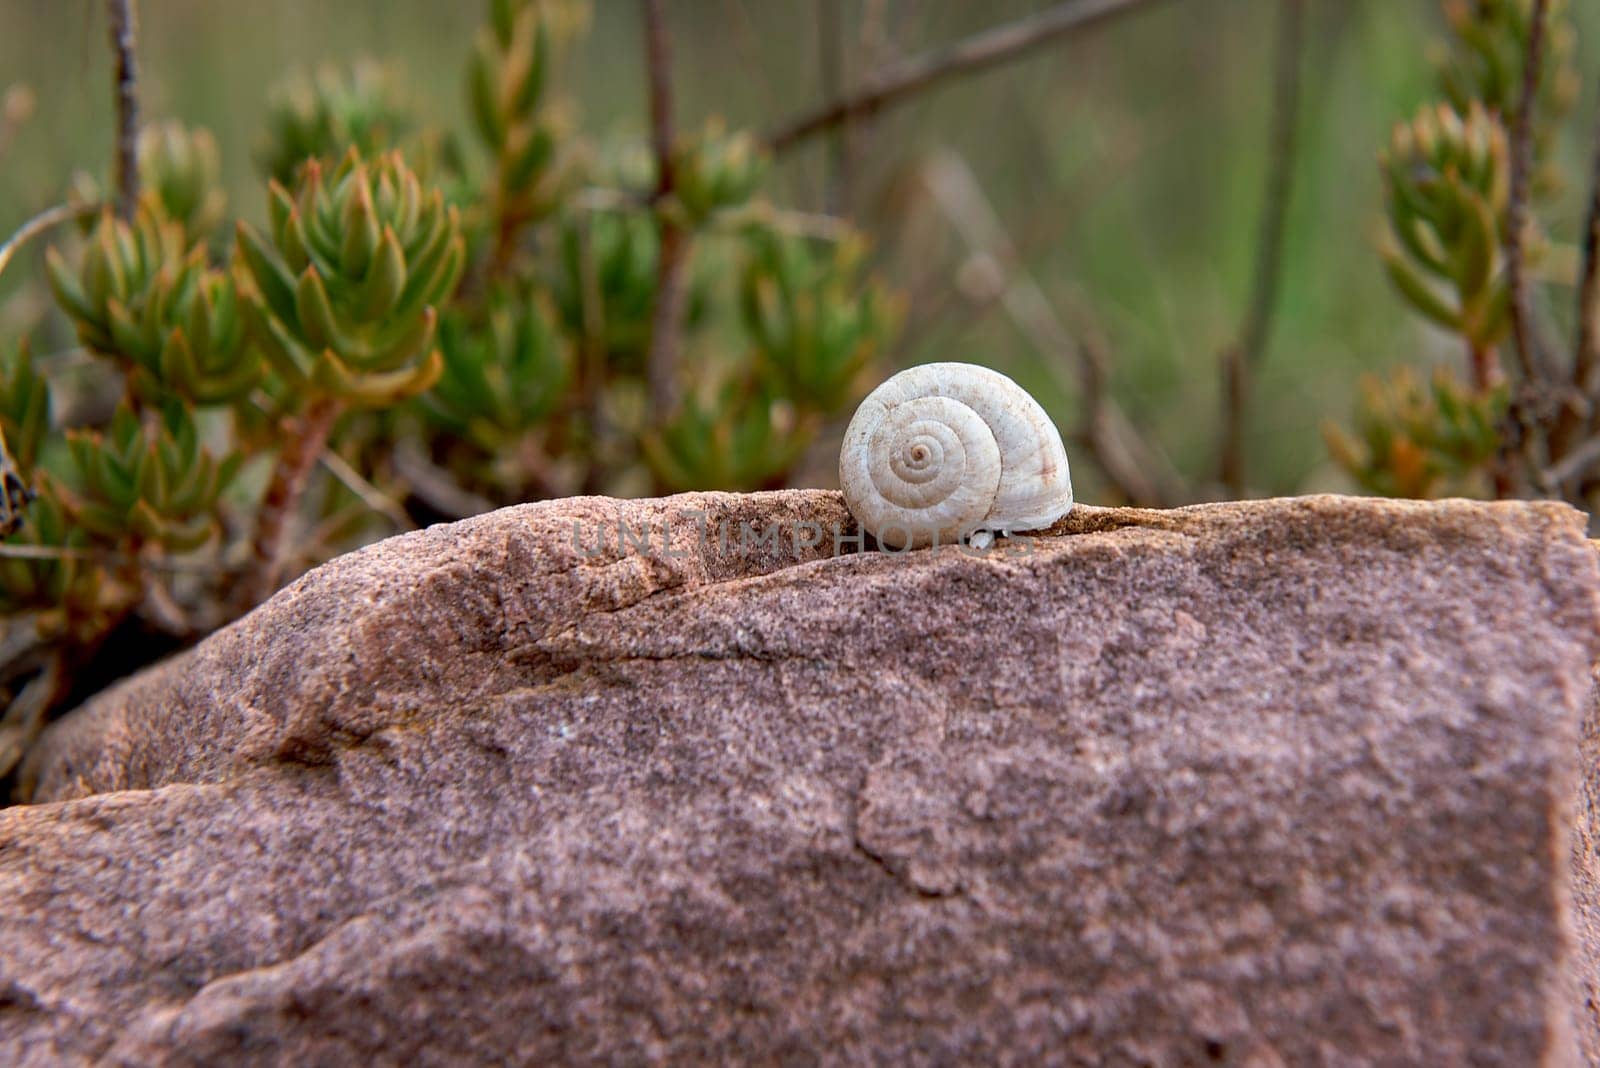 A white snail on stone and vegetation by raul_ruiz